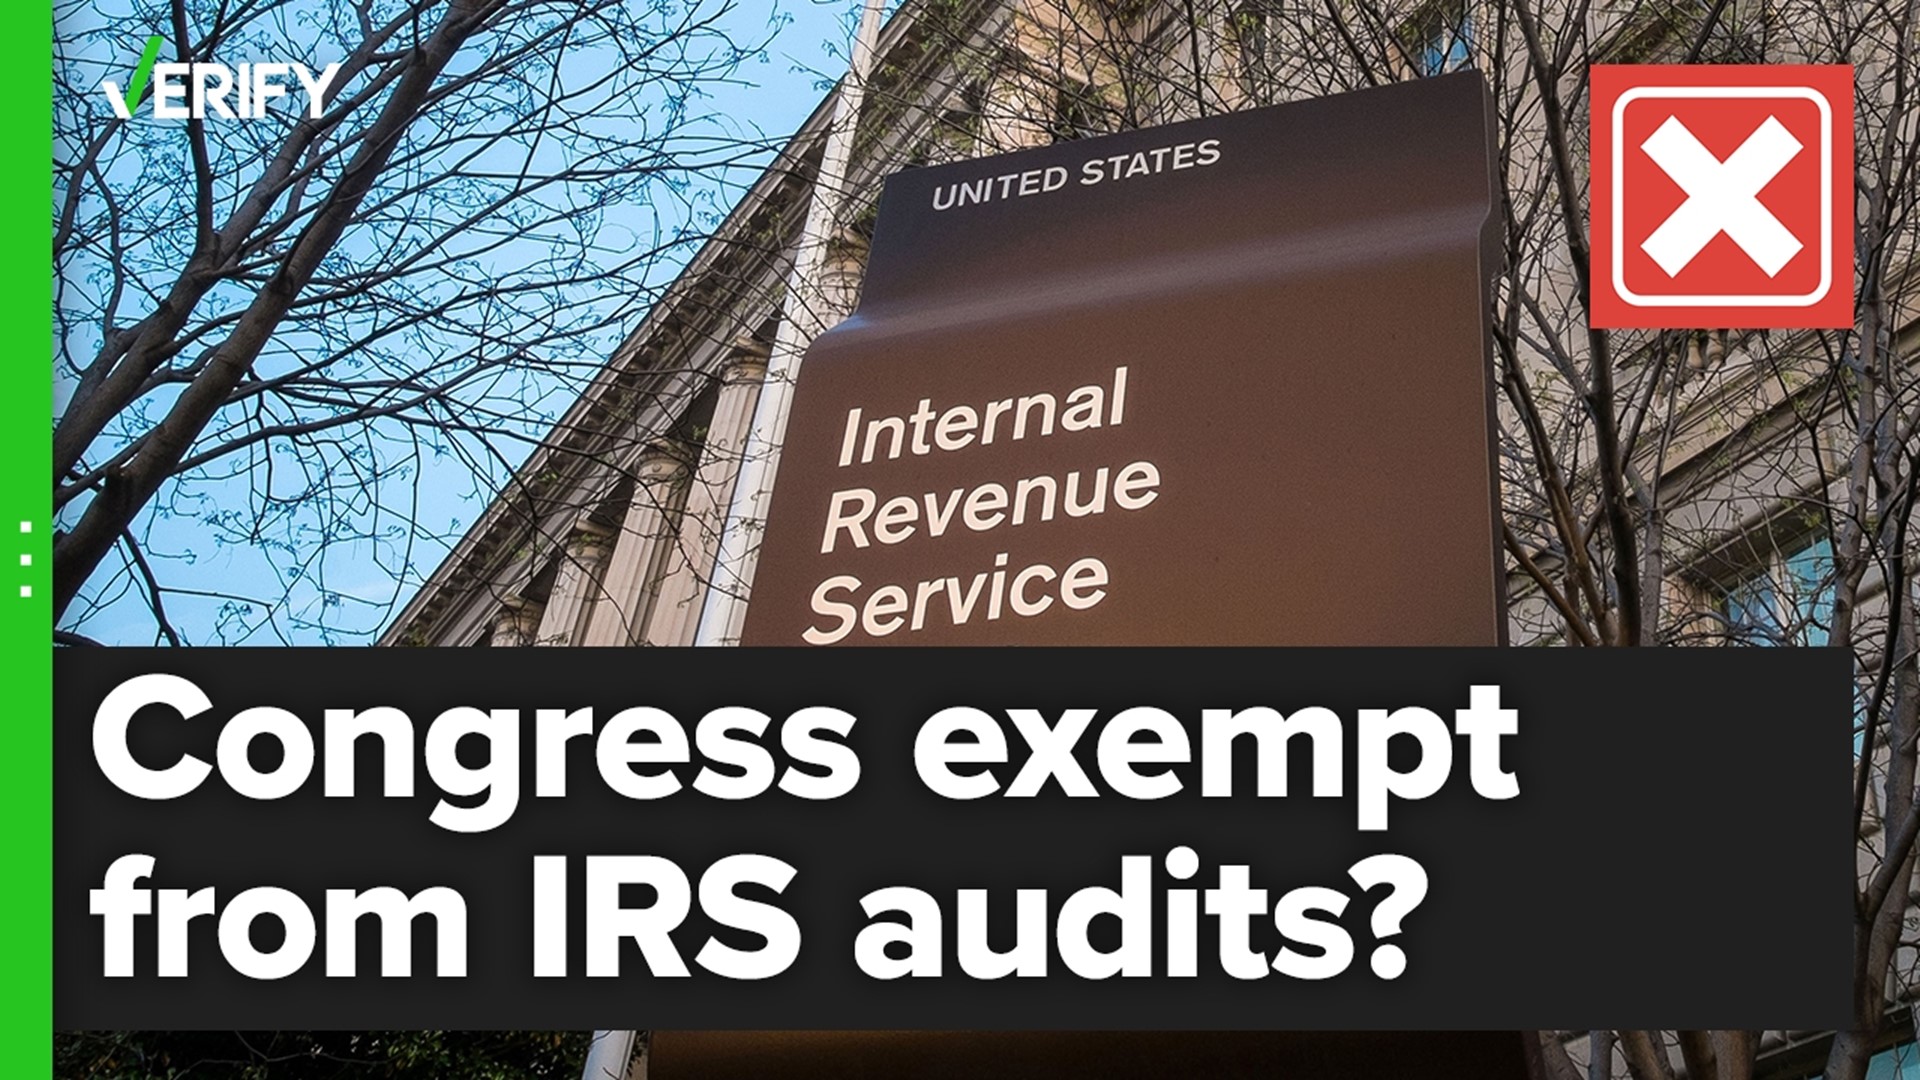 A viral tweet about the IRS that claims Congress voted to make its members exempt from audits was satirical. The IRS said anyone can be audited.